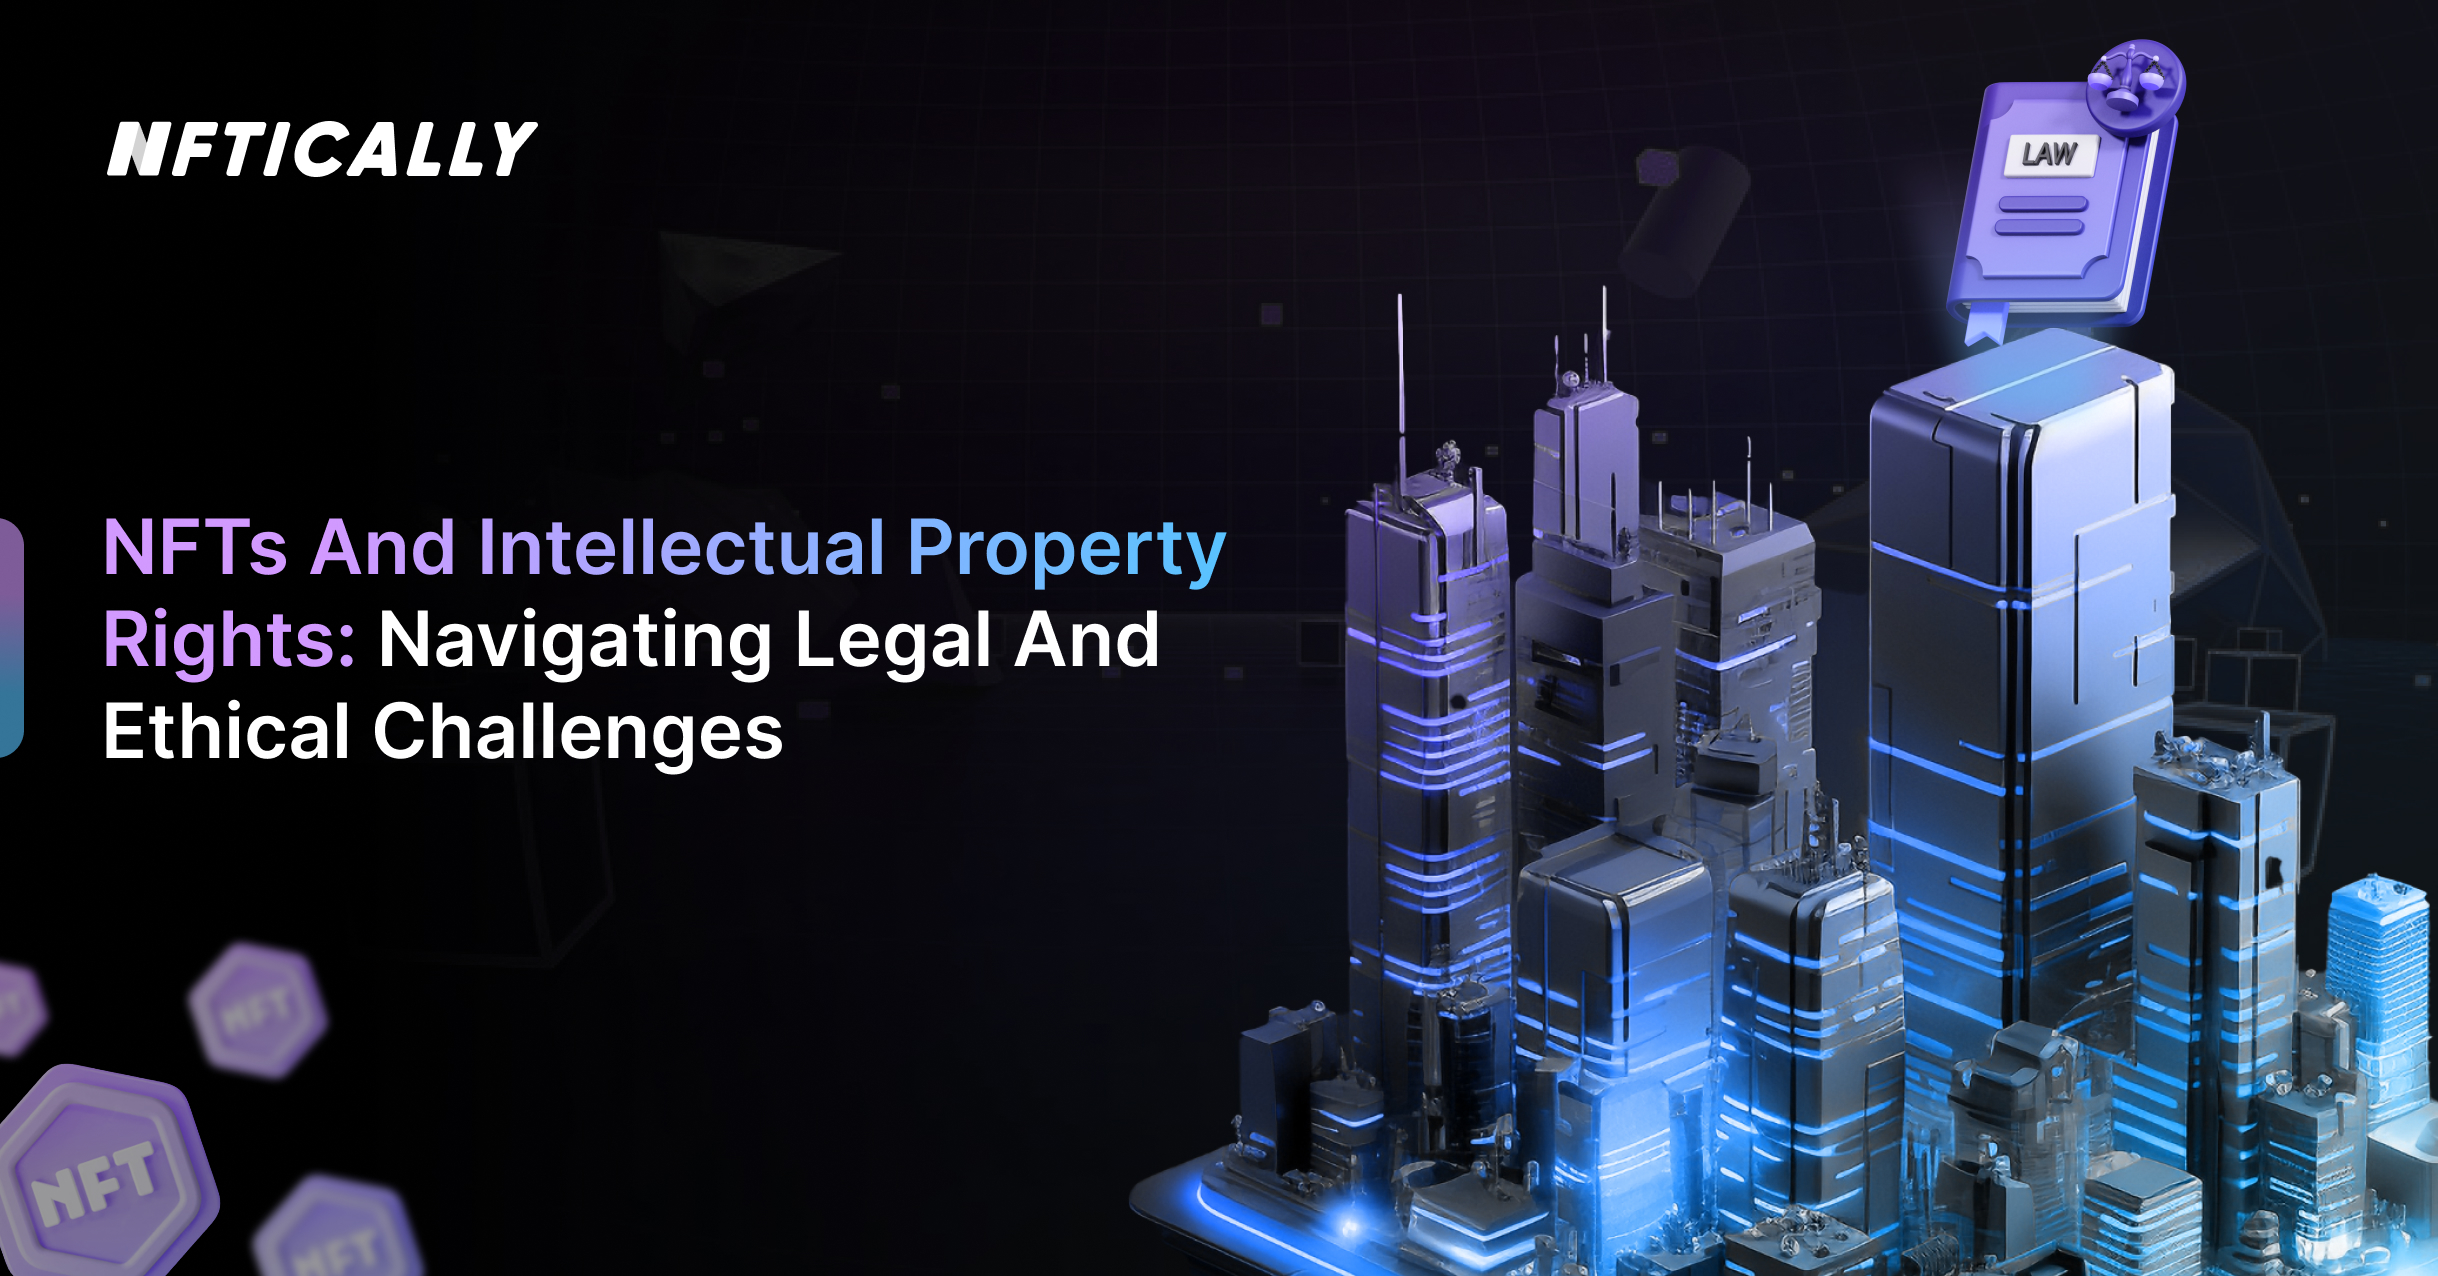 NFTs and Intellectual Property Rights: Navigating Legal and Ethical Challenges